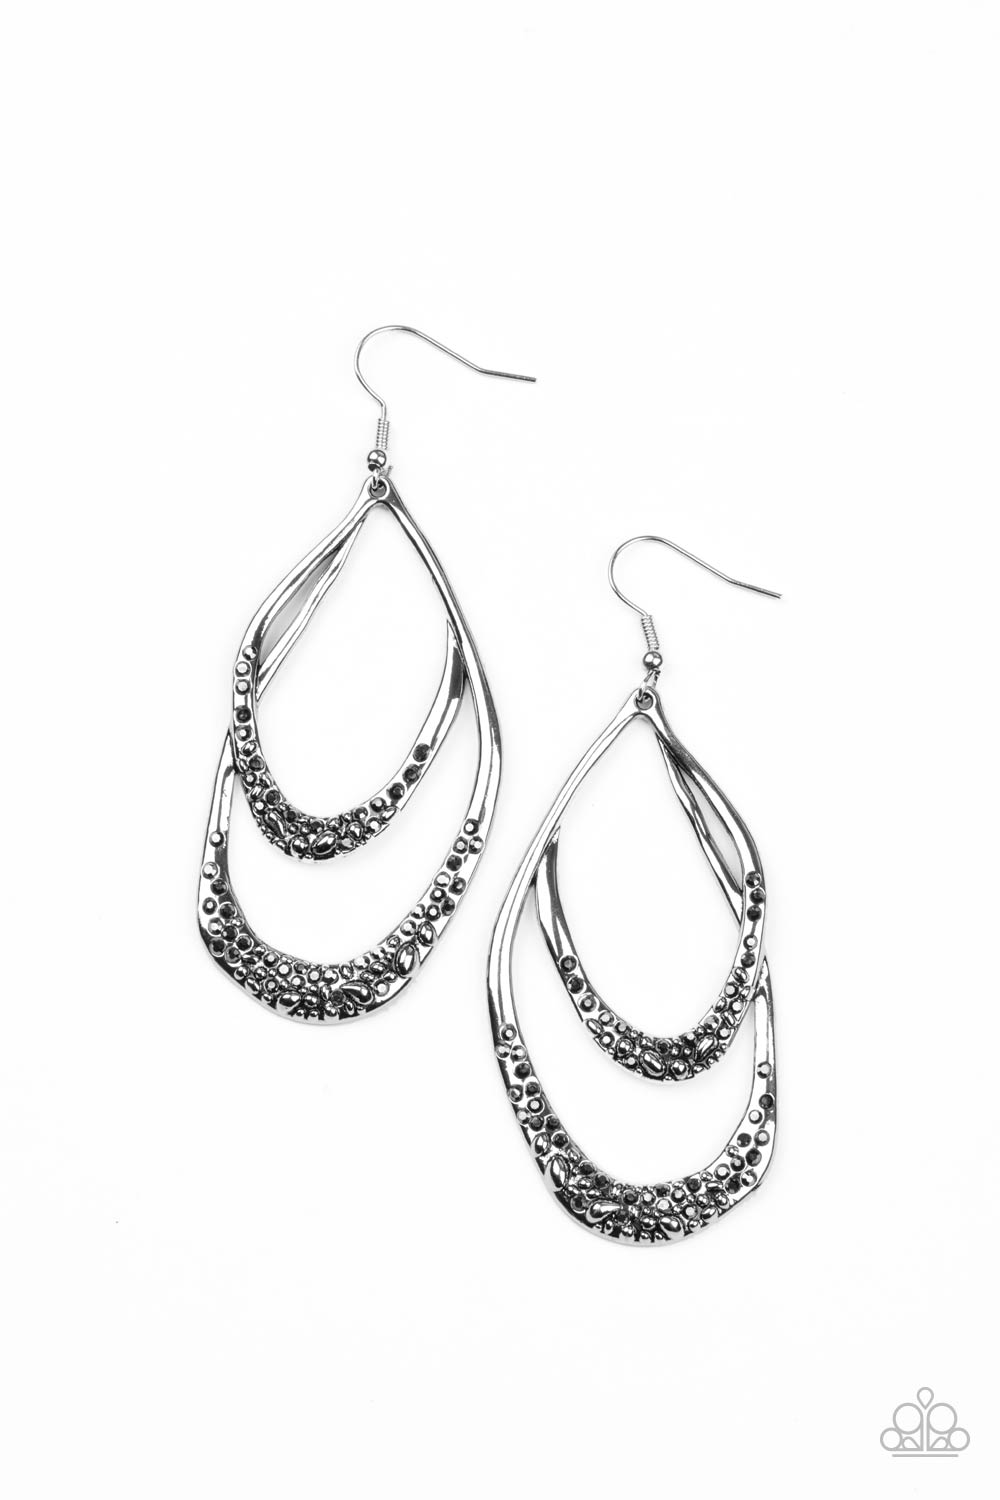 Beyond Your GLEAMS - Silver Earrings - Princess Glam Shop